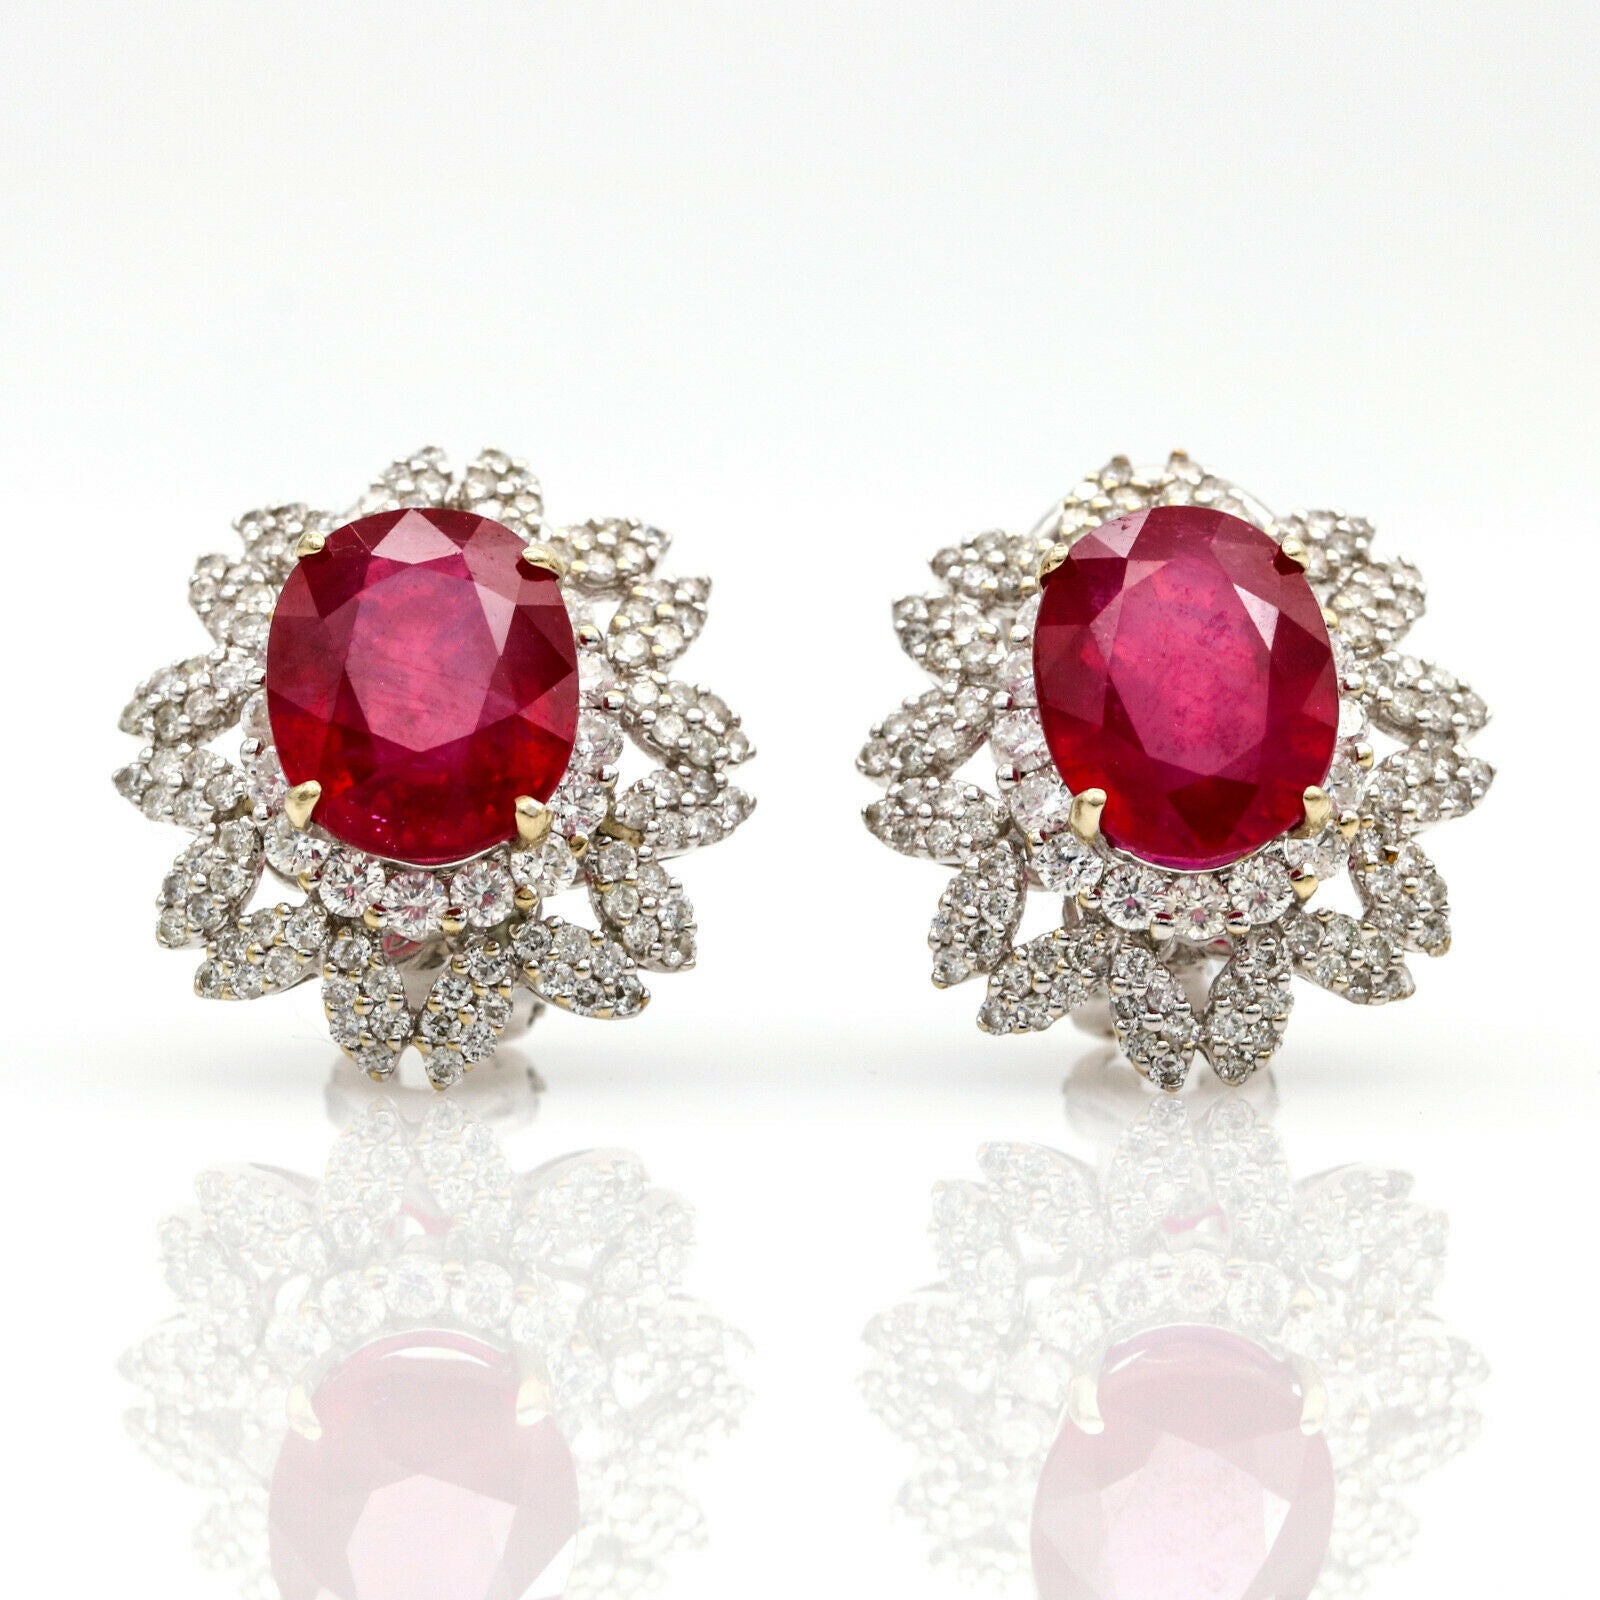 12.99 ct Ruby and Diamond Oval Earrings in 18k White Gold